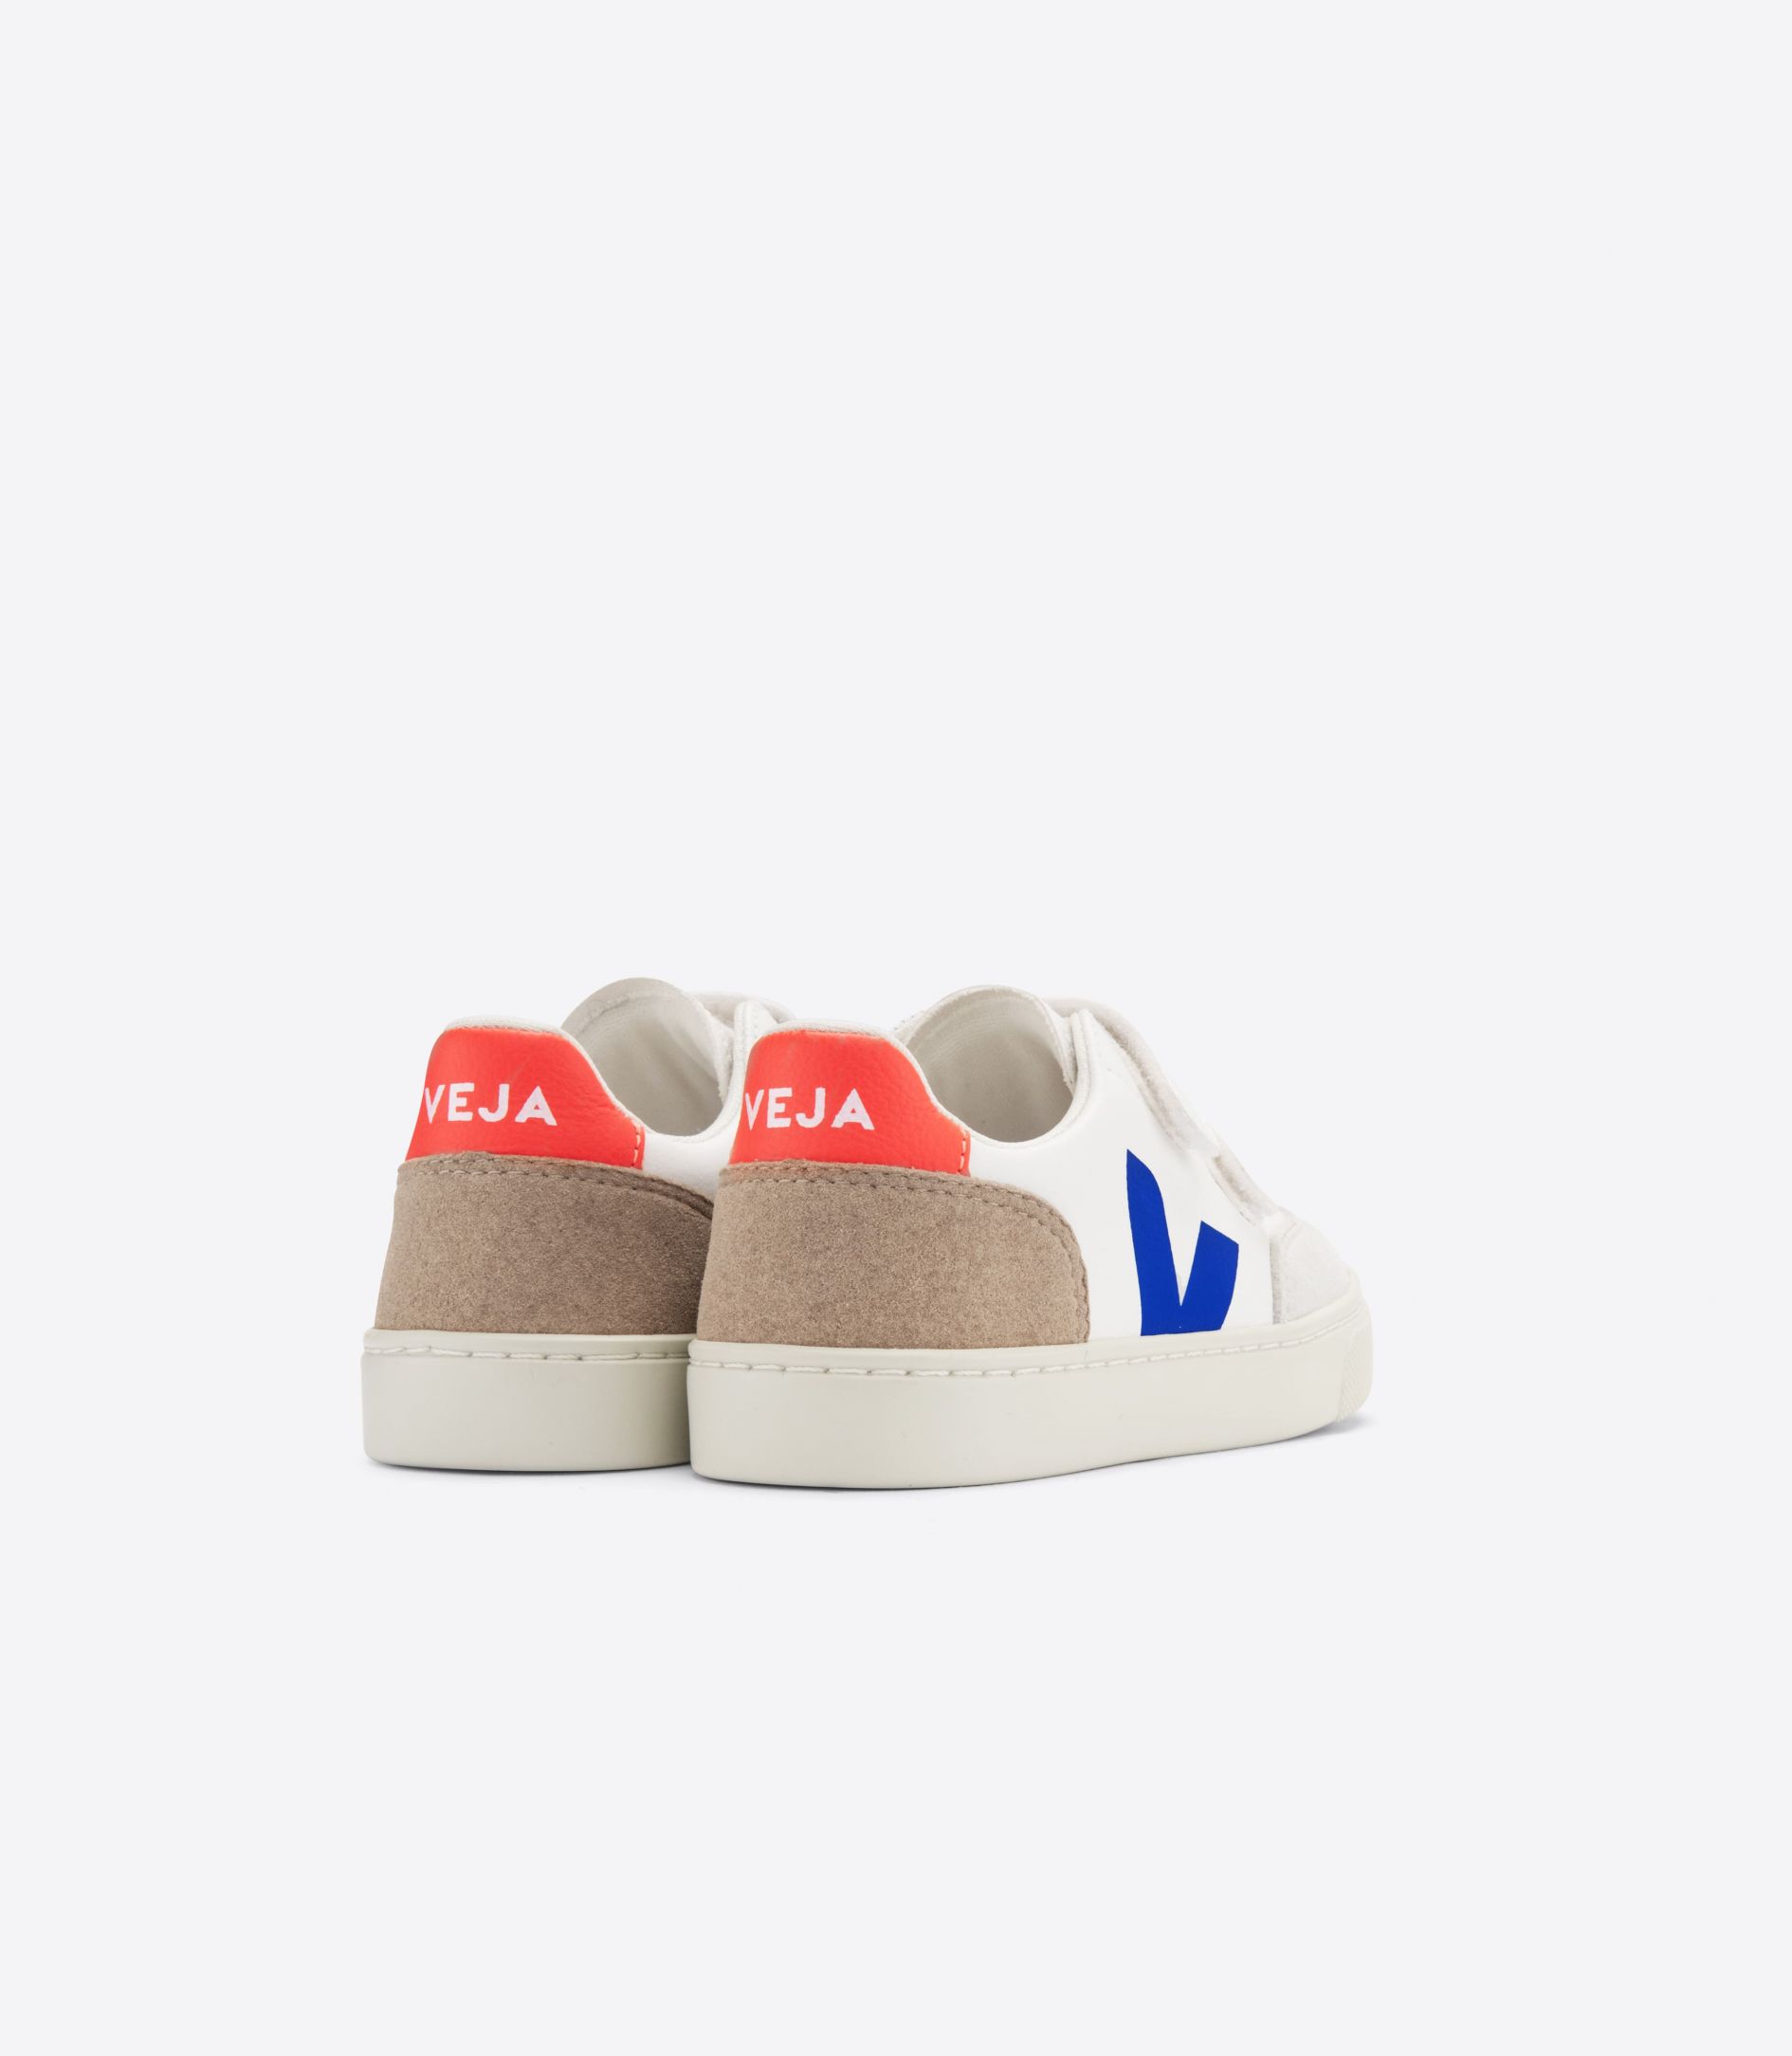 gebed roltrap Kaliber Veja sneakers laag v-12 chromefree leather white multico miel - World Of  Rascals